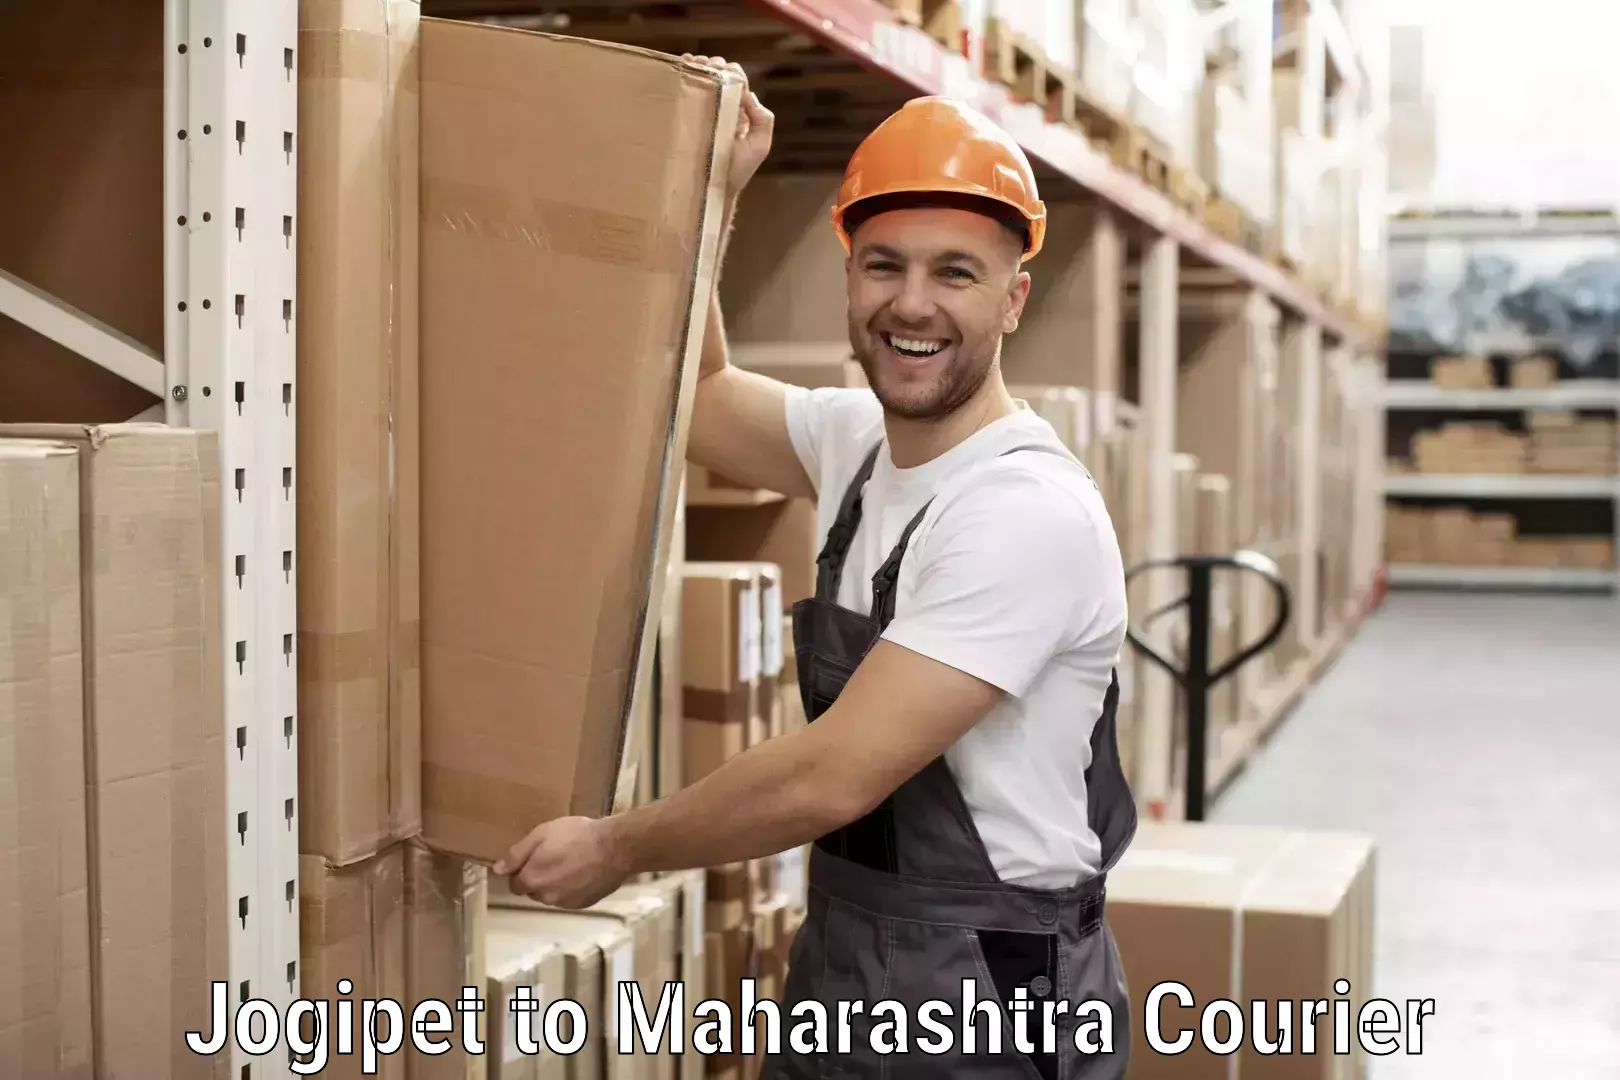 State-of-the-art courier technology Jogipet to Pen Raigad